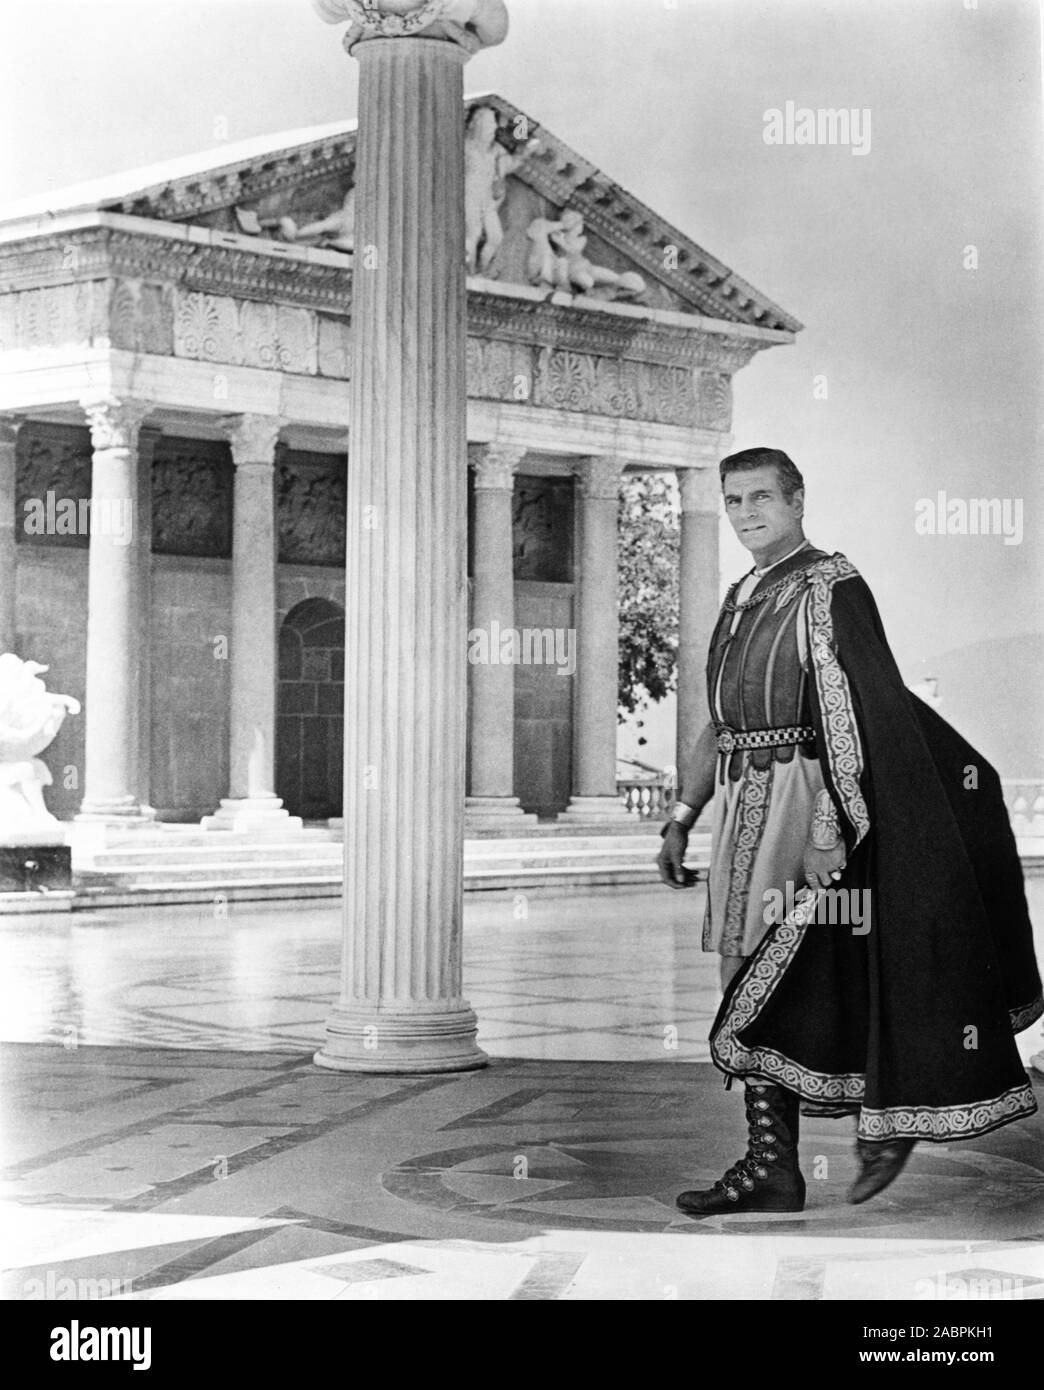 LAURENCE OLIVIER as Crassus in his villa in SPARTACUS 1960 director STANLEY KUBRICK novel Howard Fast screenplay Dalton Trumbo executive producer Kirk Douglas Bryna productions / Universal pictures Stock Photo